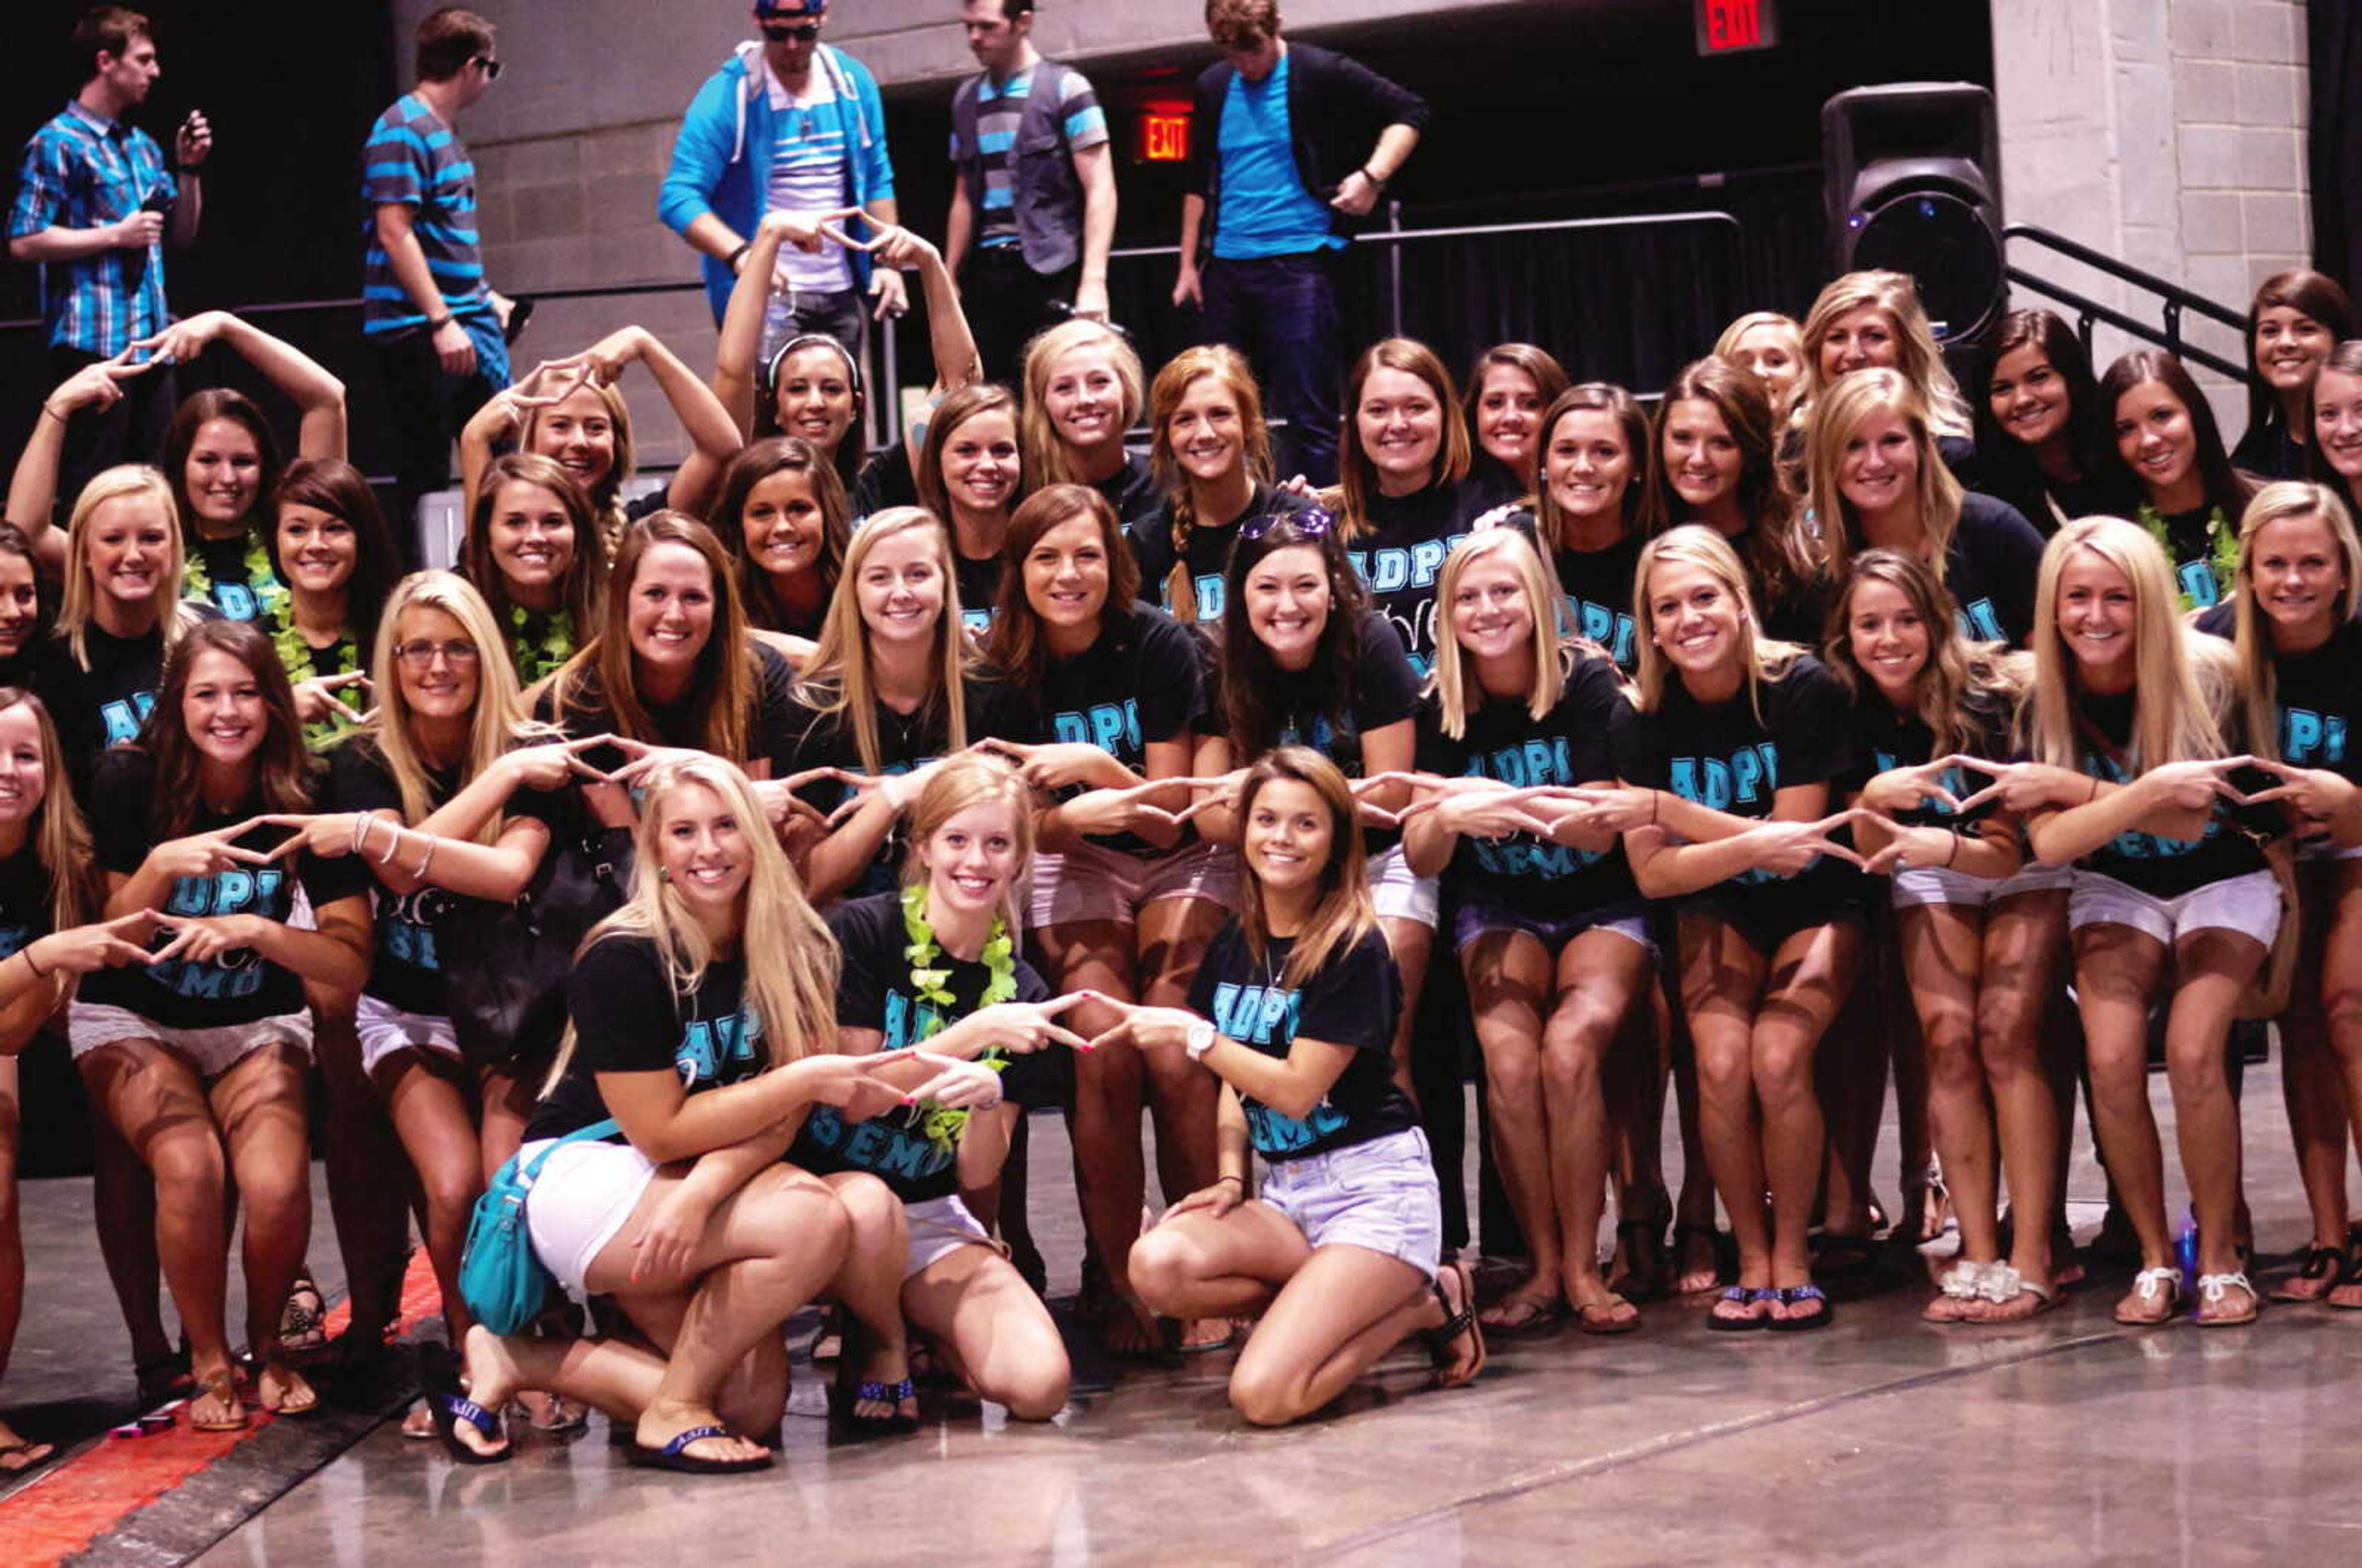 Alpha Delta Pi sorority members pose for a photo. Photo by Alyssa Brewer